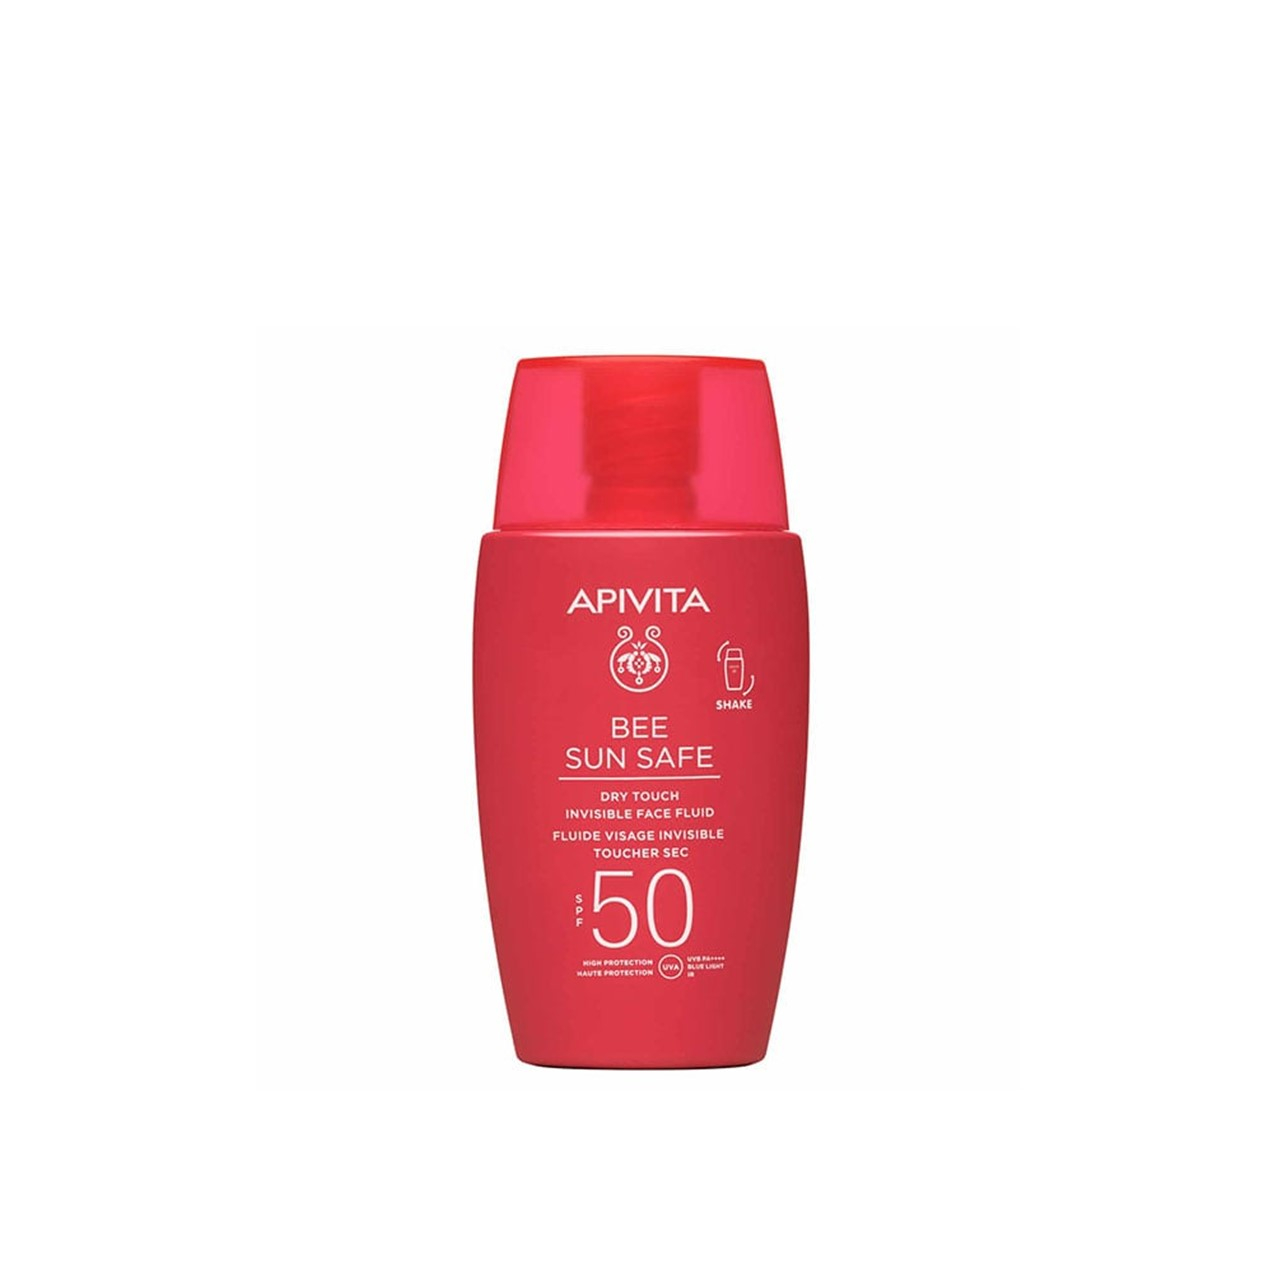 Apivita Bee Sun Safe Dry Touch Invisible Face Fluid Sunscreen SPF50 50 ml +  After Sun Cool & Smooth Face & Body Gel-Cream 100 ml - Sunscreen and after  sun travel size set - Vita4you